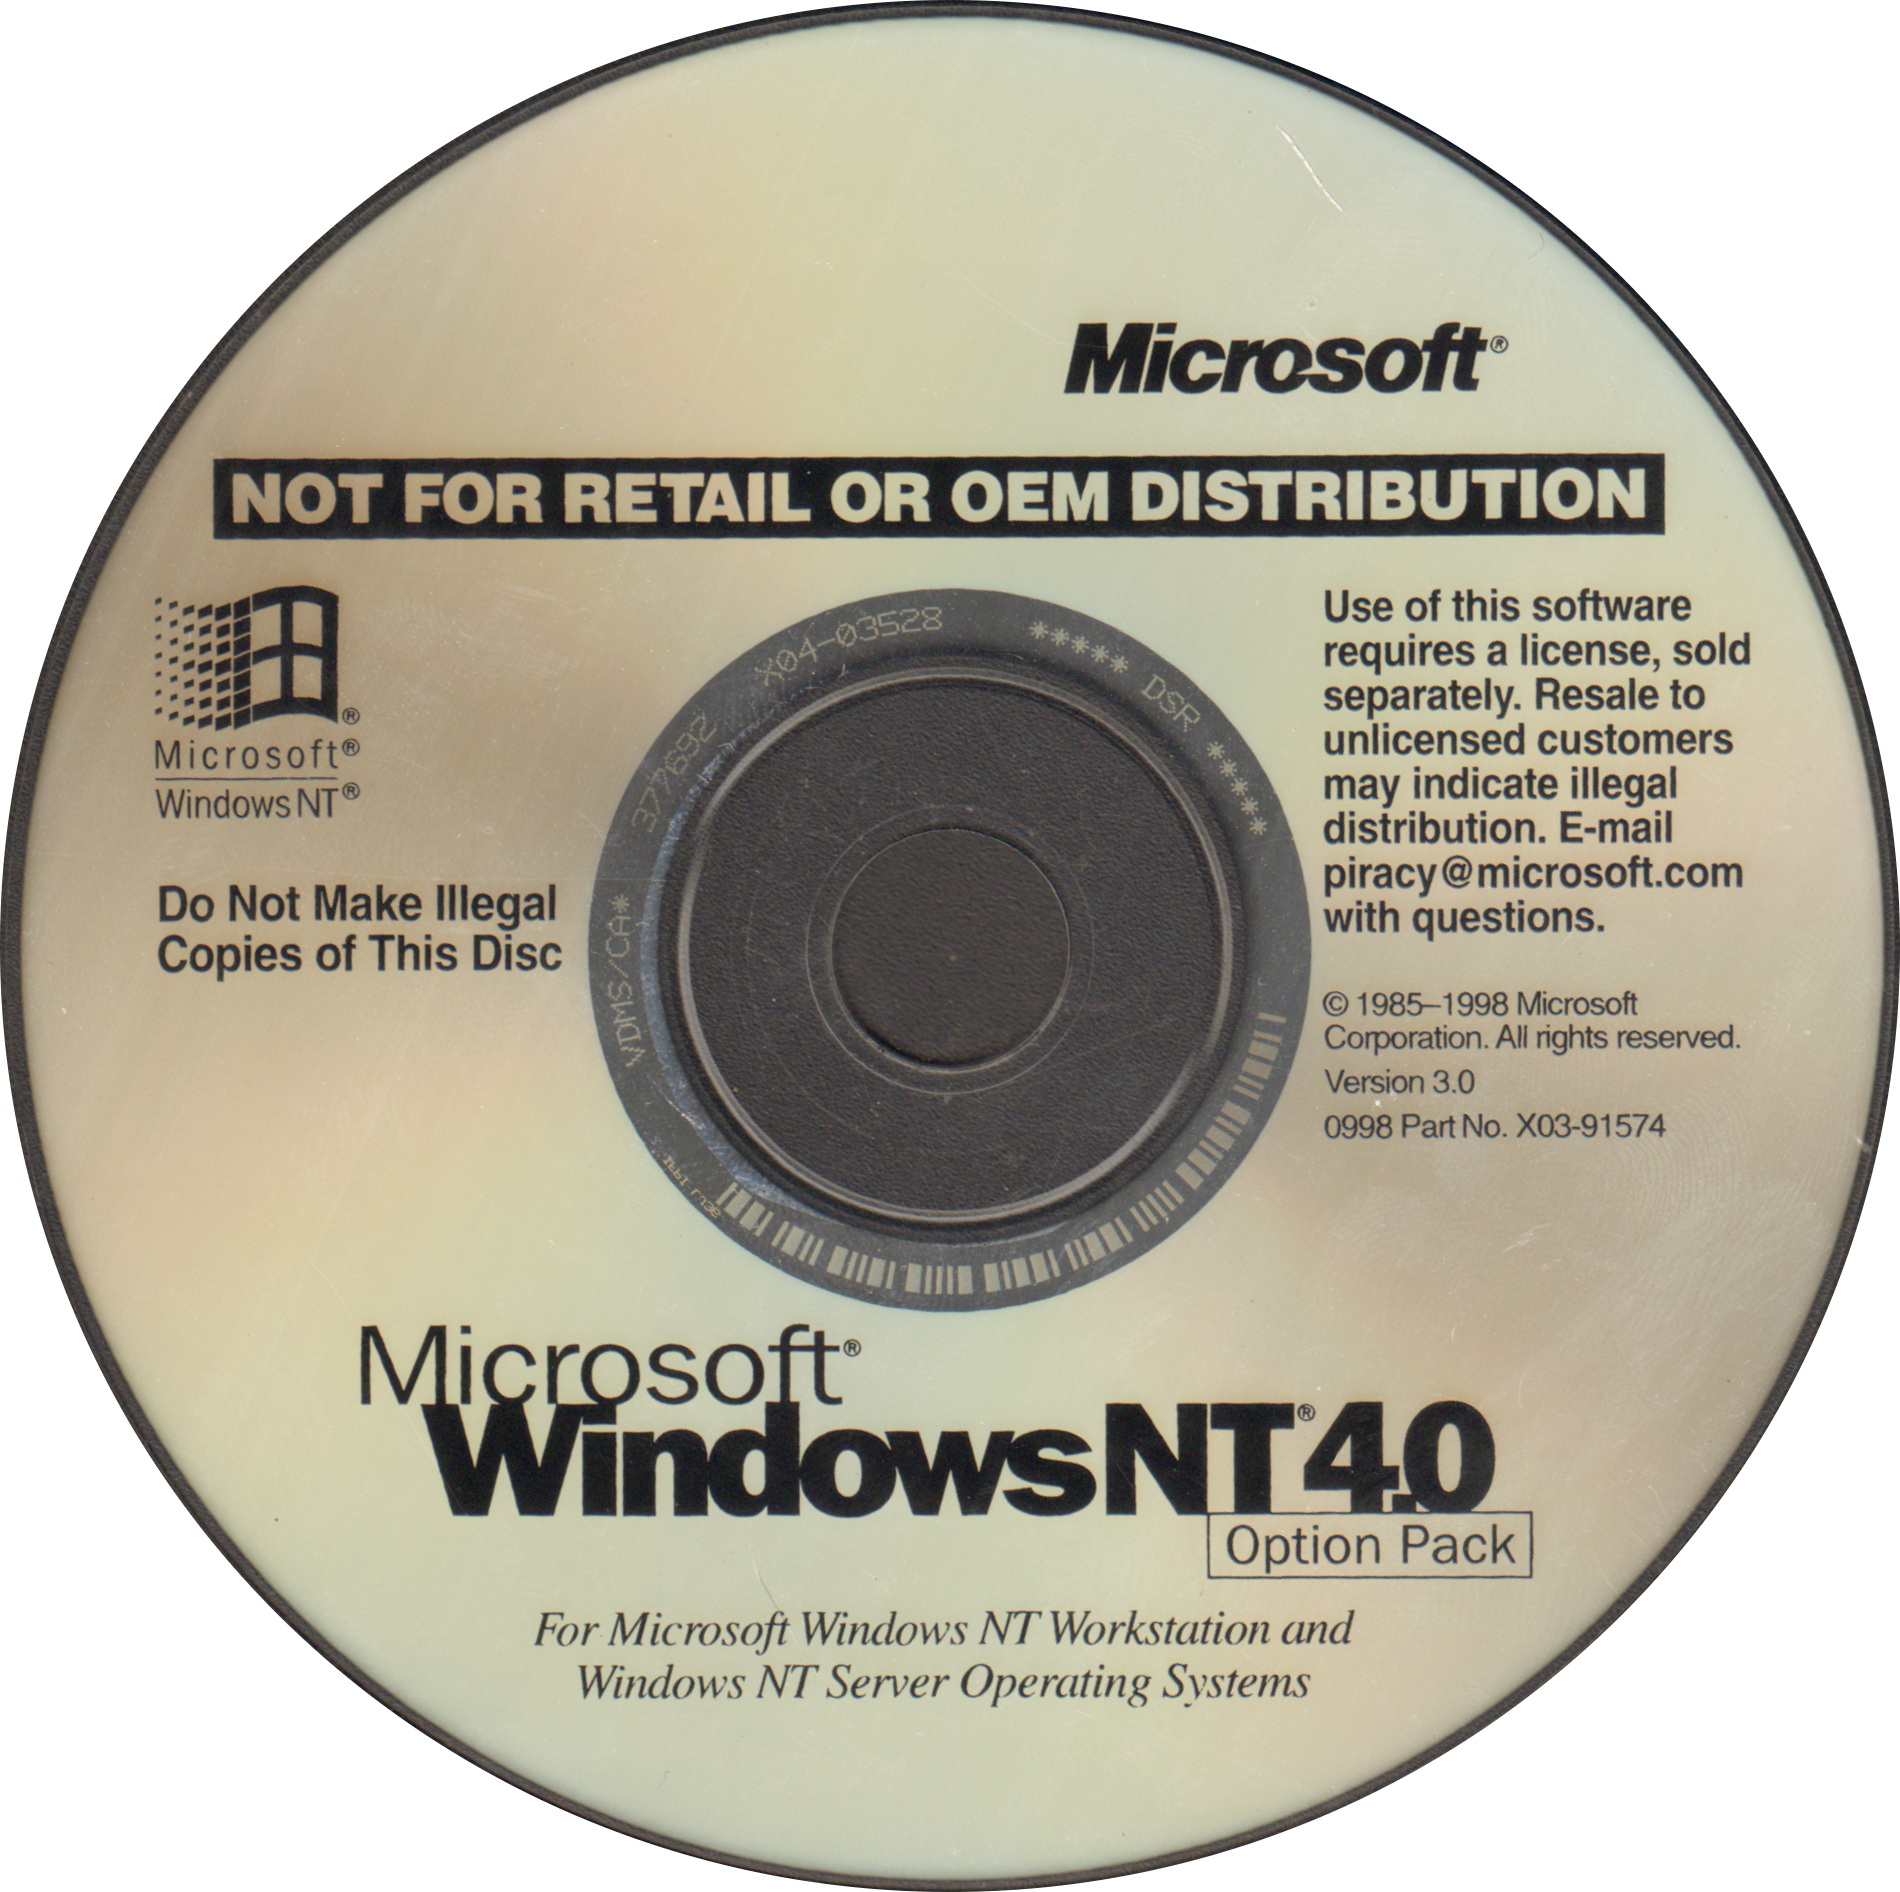 Windows Nt Workstation 4.0 Iso Download